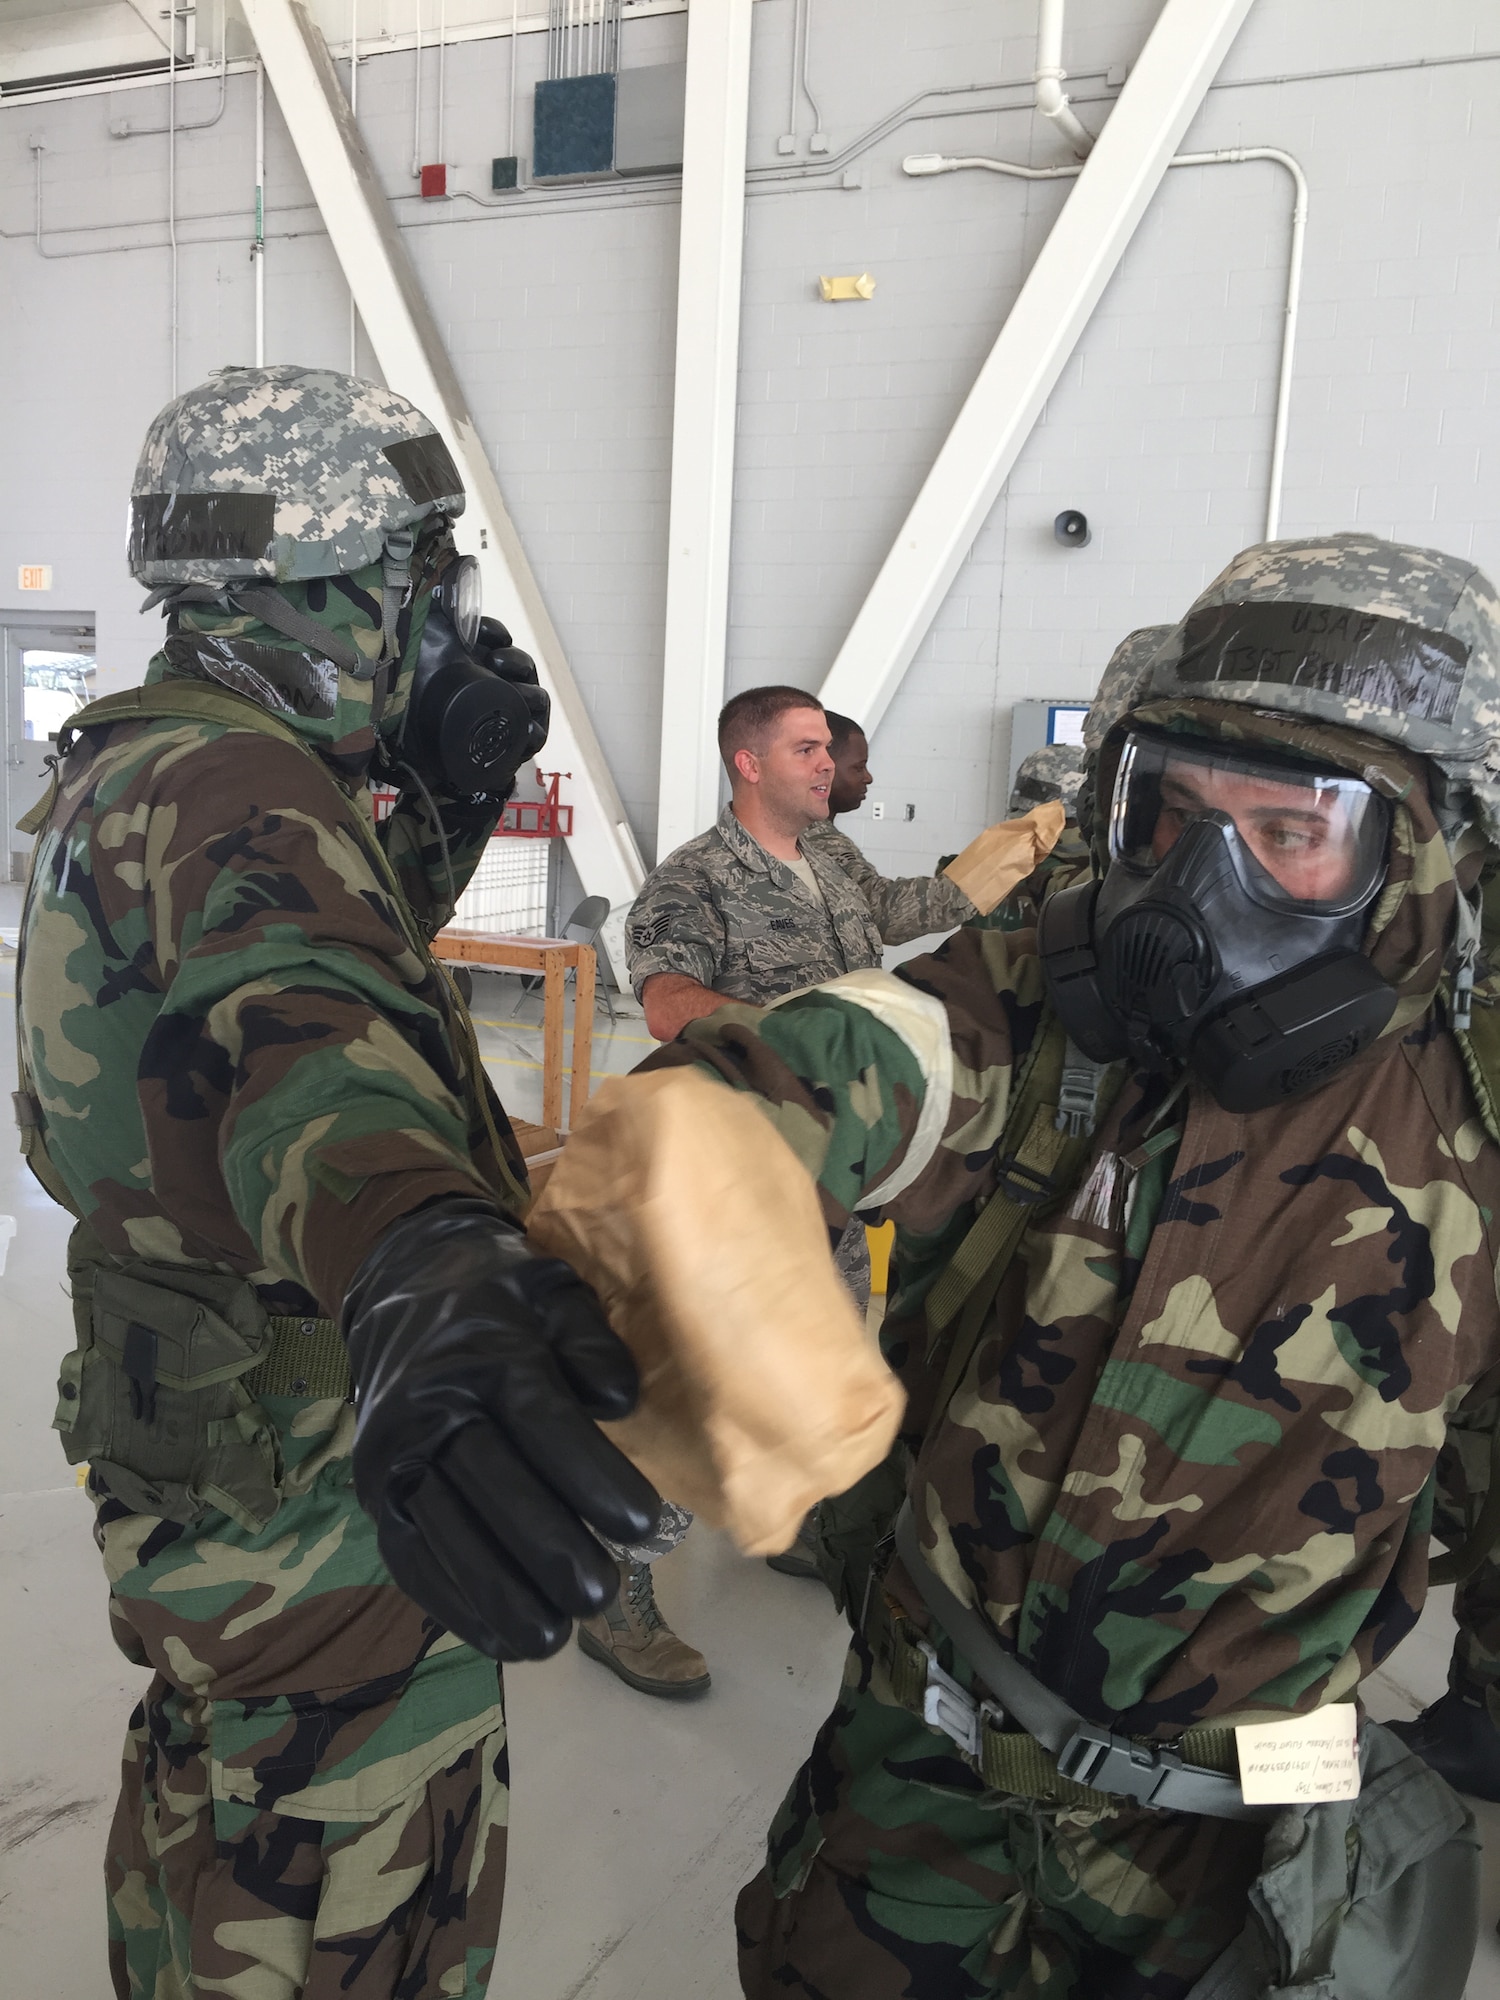 Tech. Sgt. Beau Coleman practices decontaminating Airman 1st Class Lance Goodman's chemical suit as part of a Chemical, Biological, Radiological, Nuclear and Explosives (CBRNE) training class at the Combat Readiness Training Center in Gulfport, Miss. on July 13, 2015.  (U.S. Air National Guard Photo by Capt. Steven Stubbs/Released)